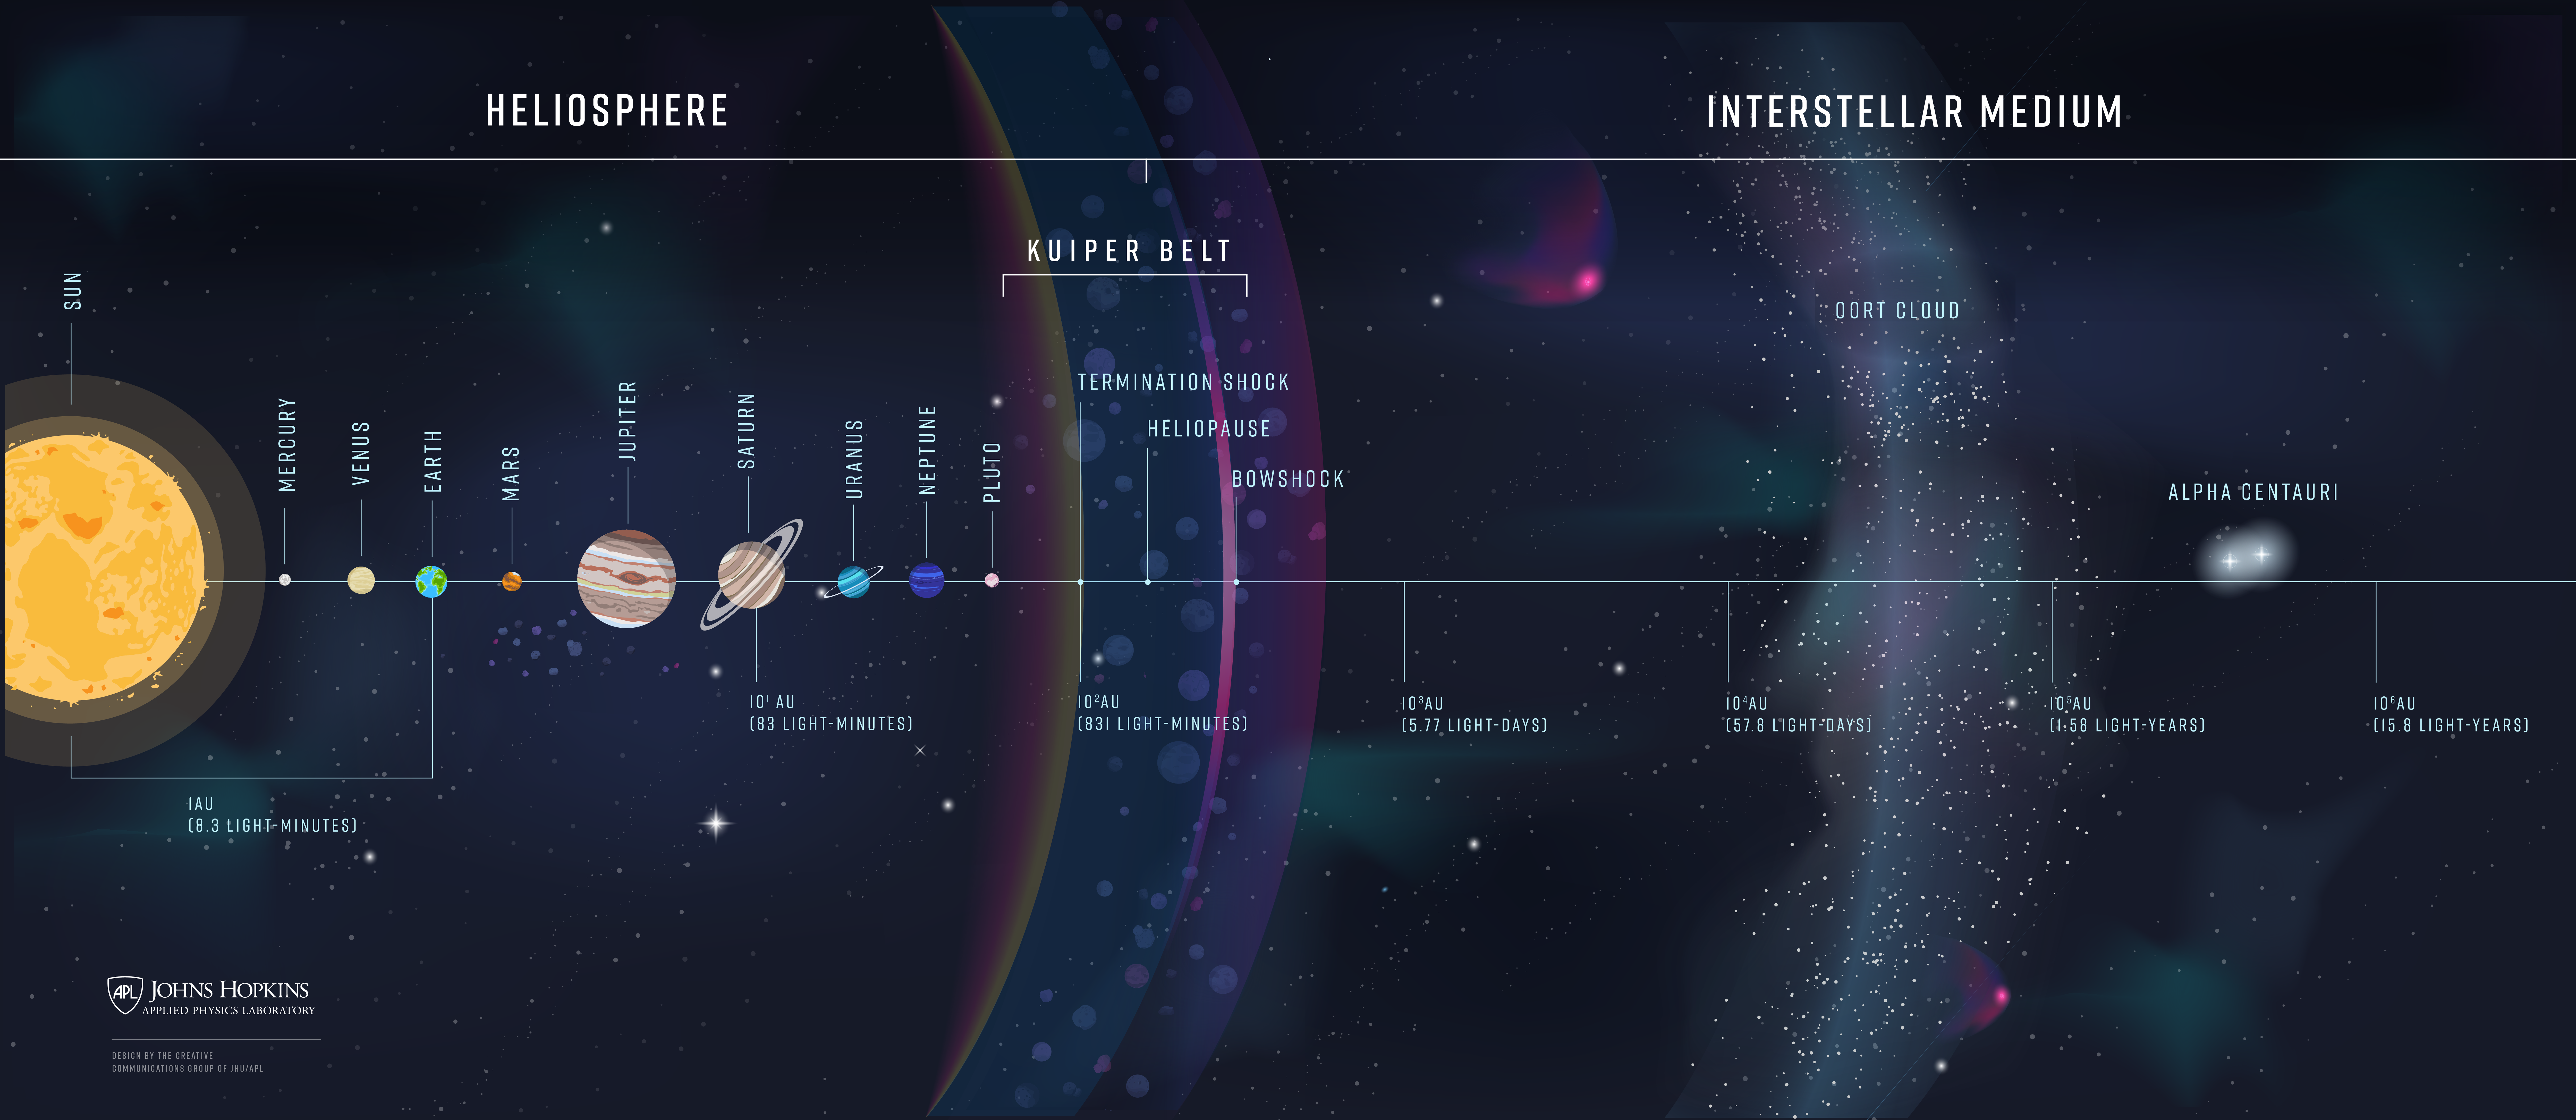 Interstellar Probe is a decades-long mission to reach several hundreds of astronomical units.